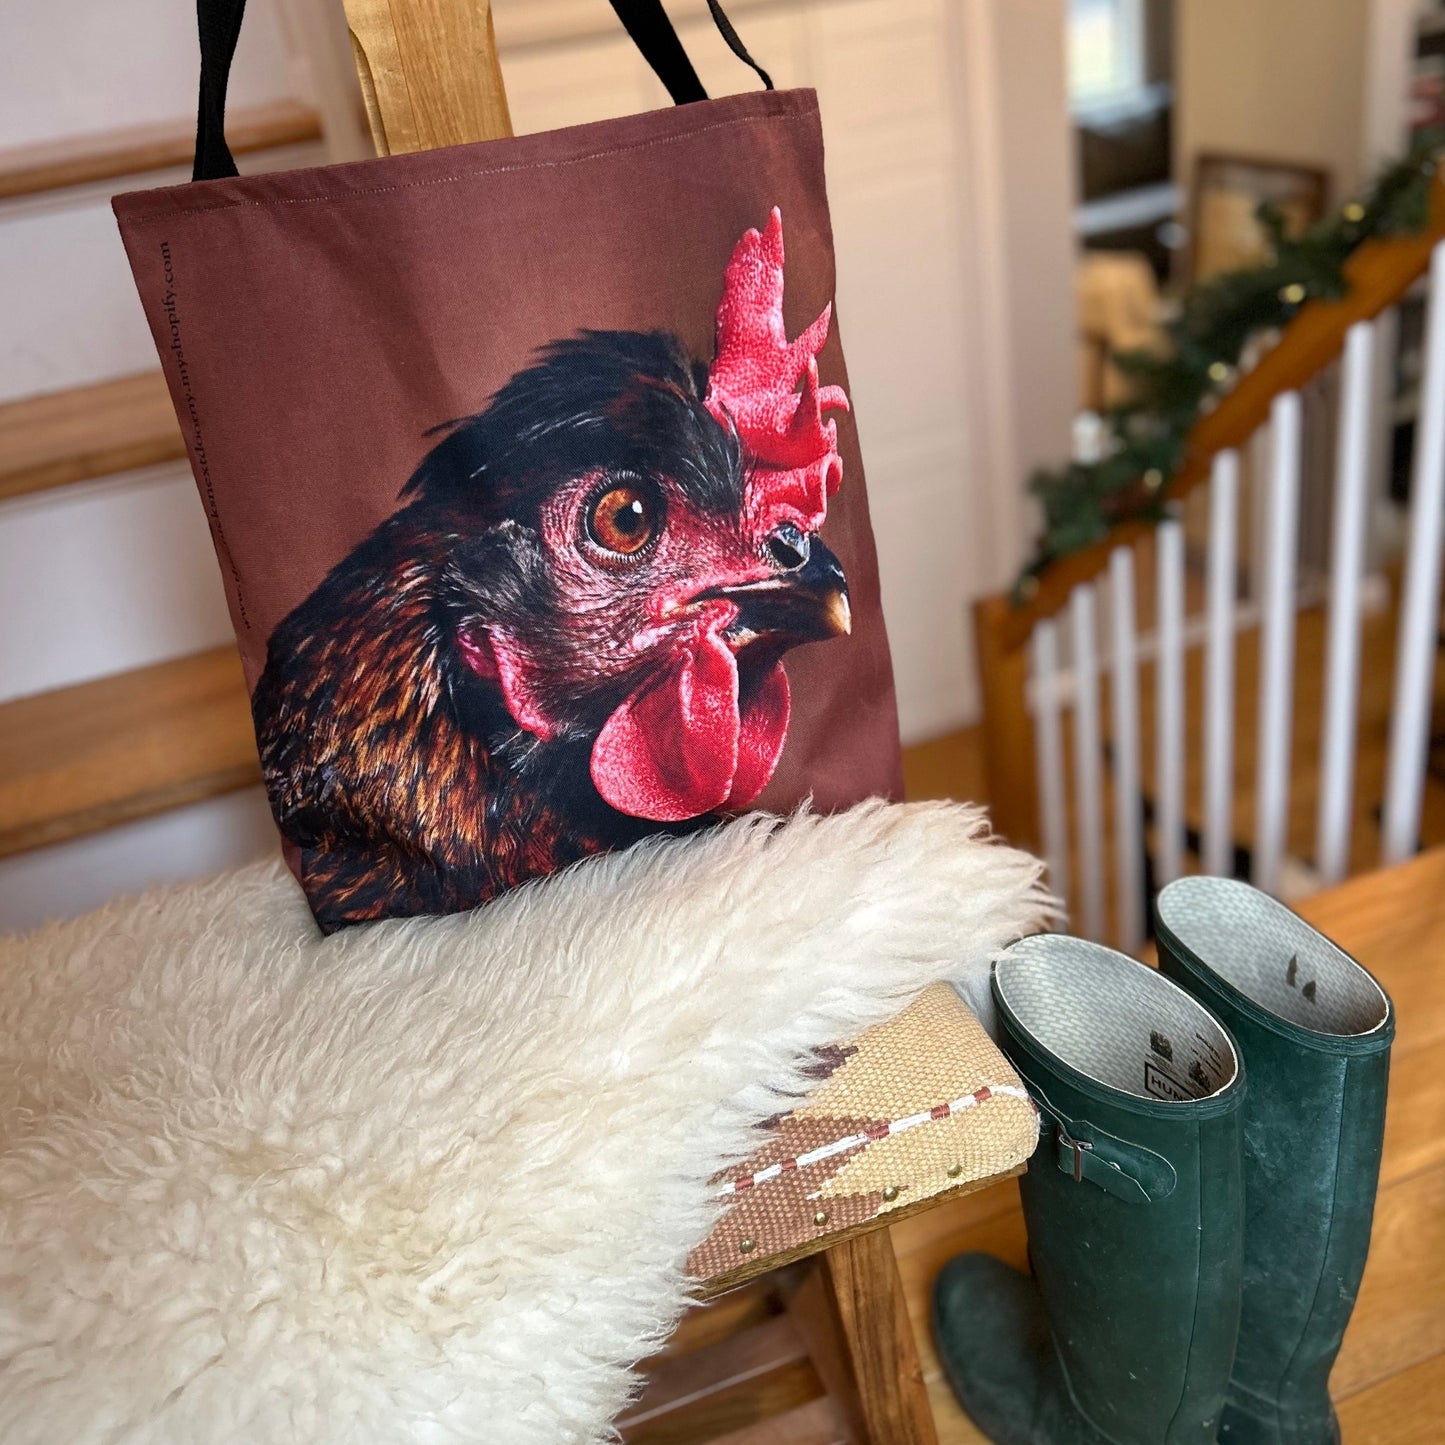 The Chick n' Tote Bag